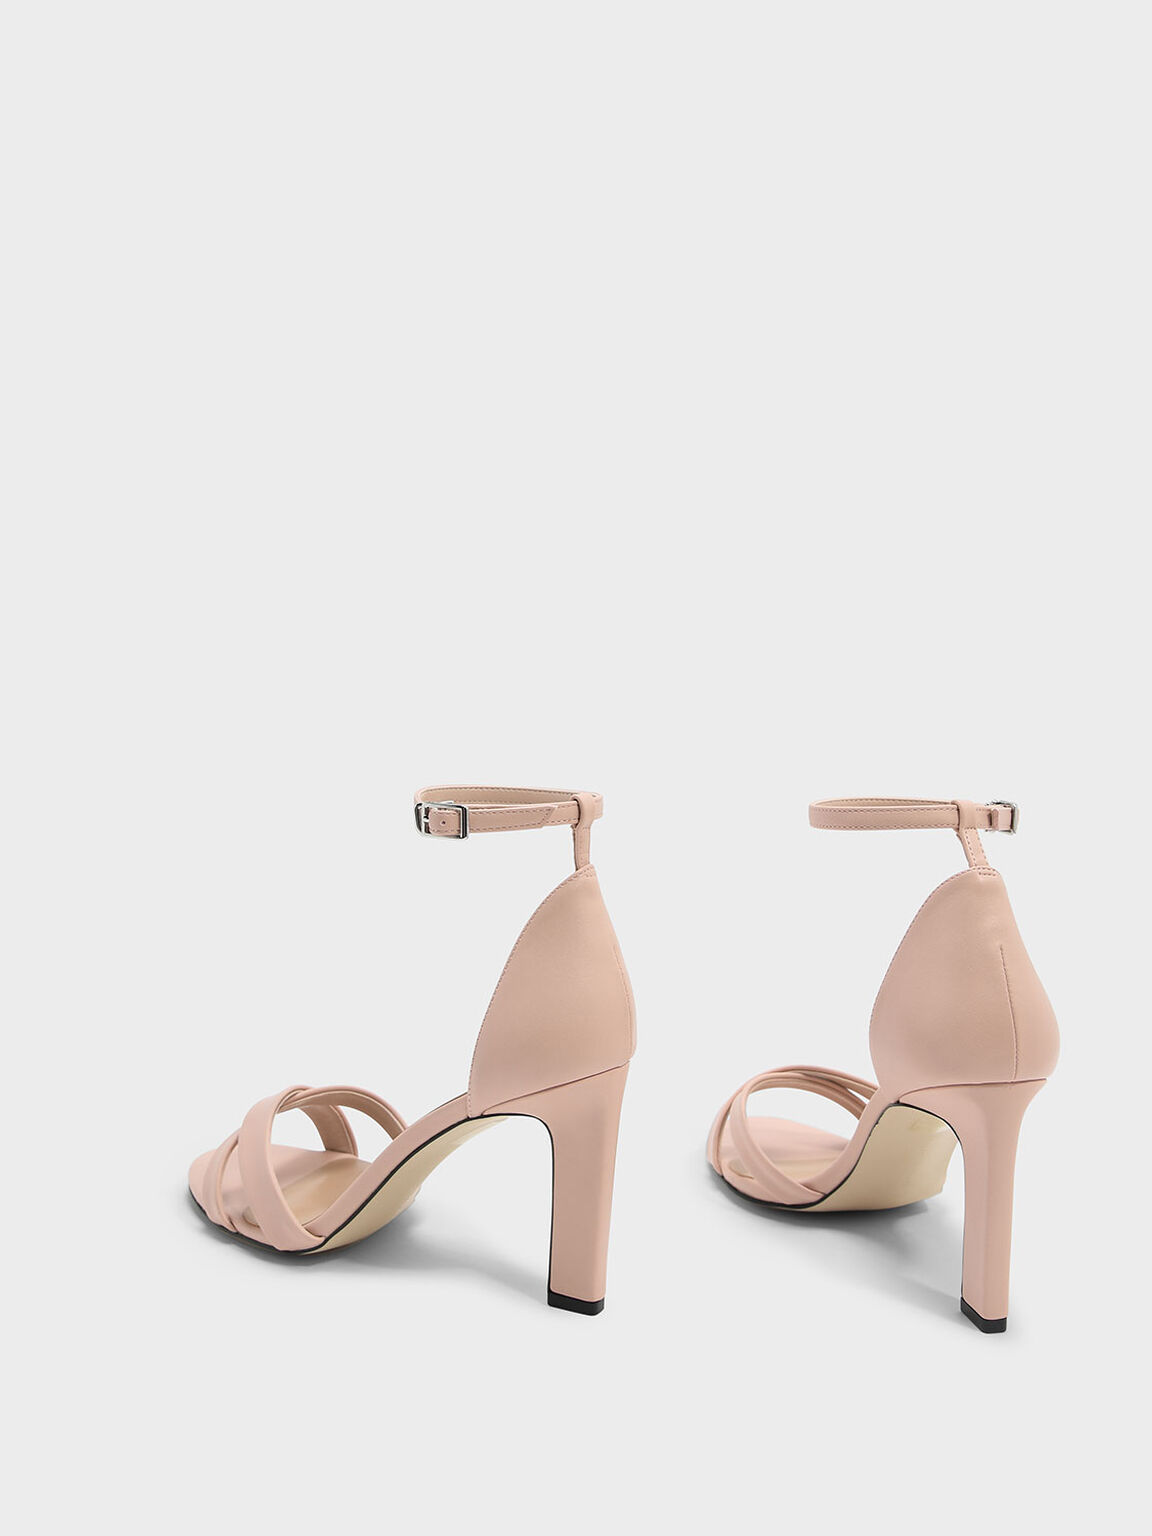 Ankle Strap Criss Cross Heeled Sandals, Nude, hi-res